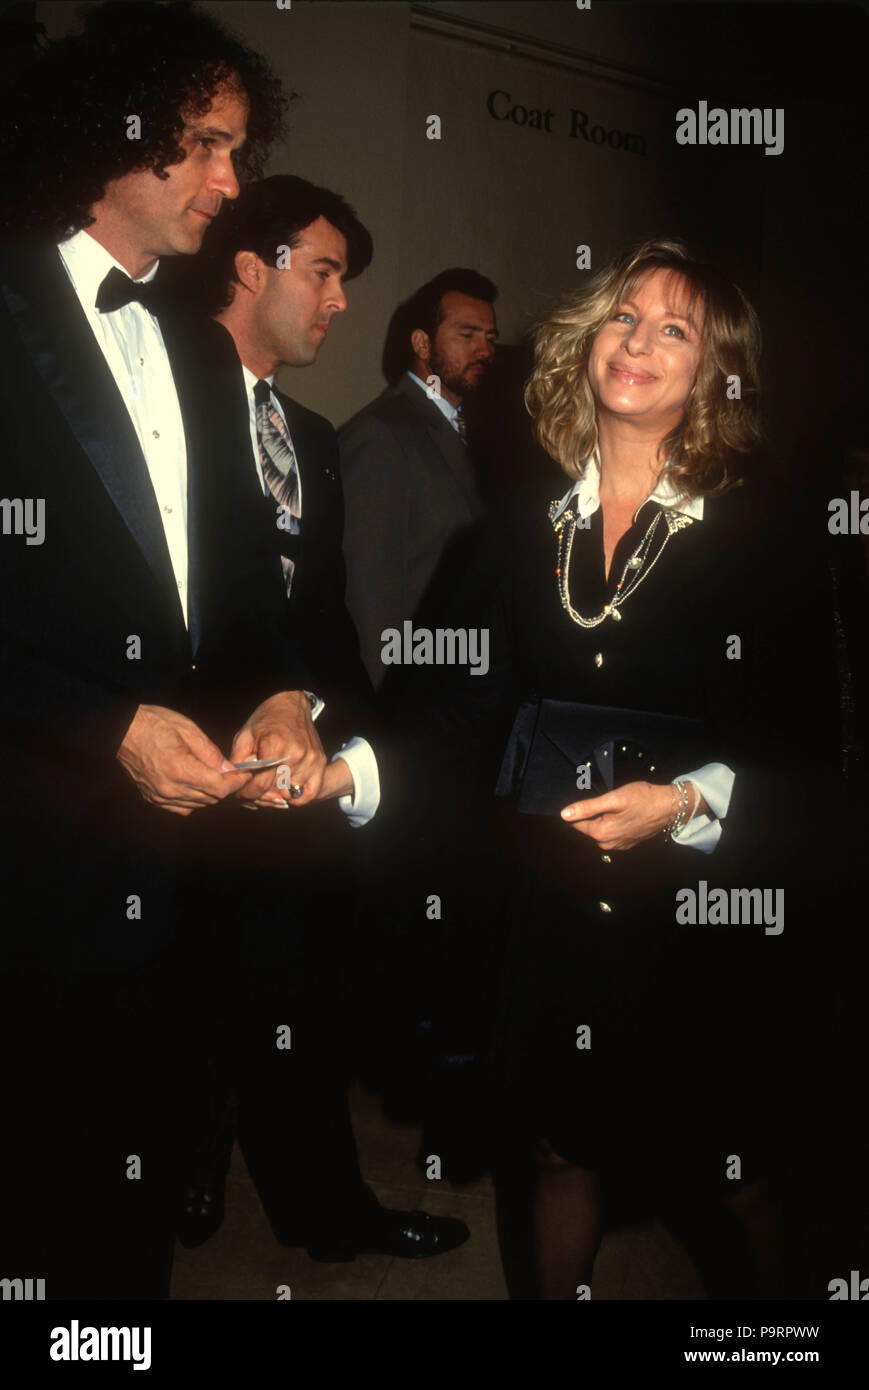 BEVERLY HILLS, CA - MARCH 22: (L-R) Composer Richard Baskin and Singer/actress Barbra Streisand attend the 44th Annual Writers Guild of America Awards on March 22, 1992 at the Beverly Hilton Hotel in Beverly Hills, California. Photo by Barry King/Alamy Stock Photo Stock Photo